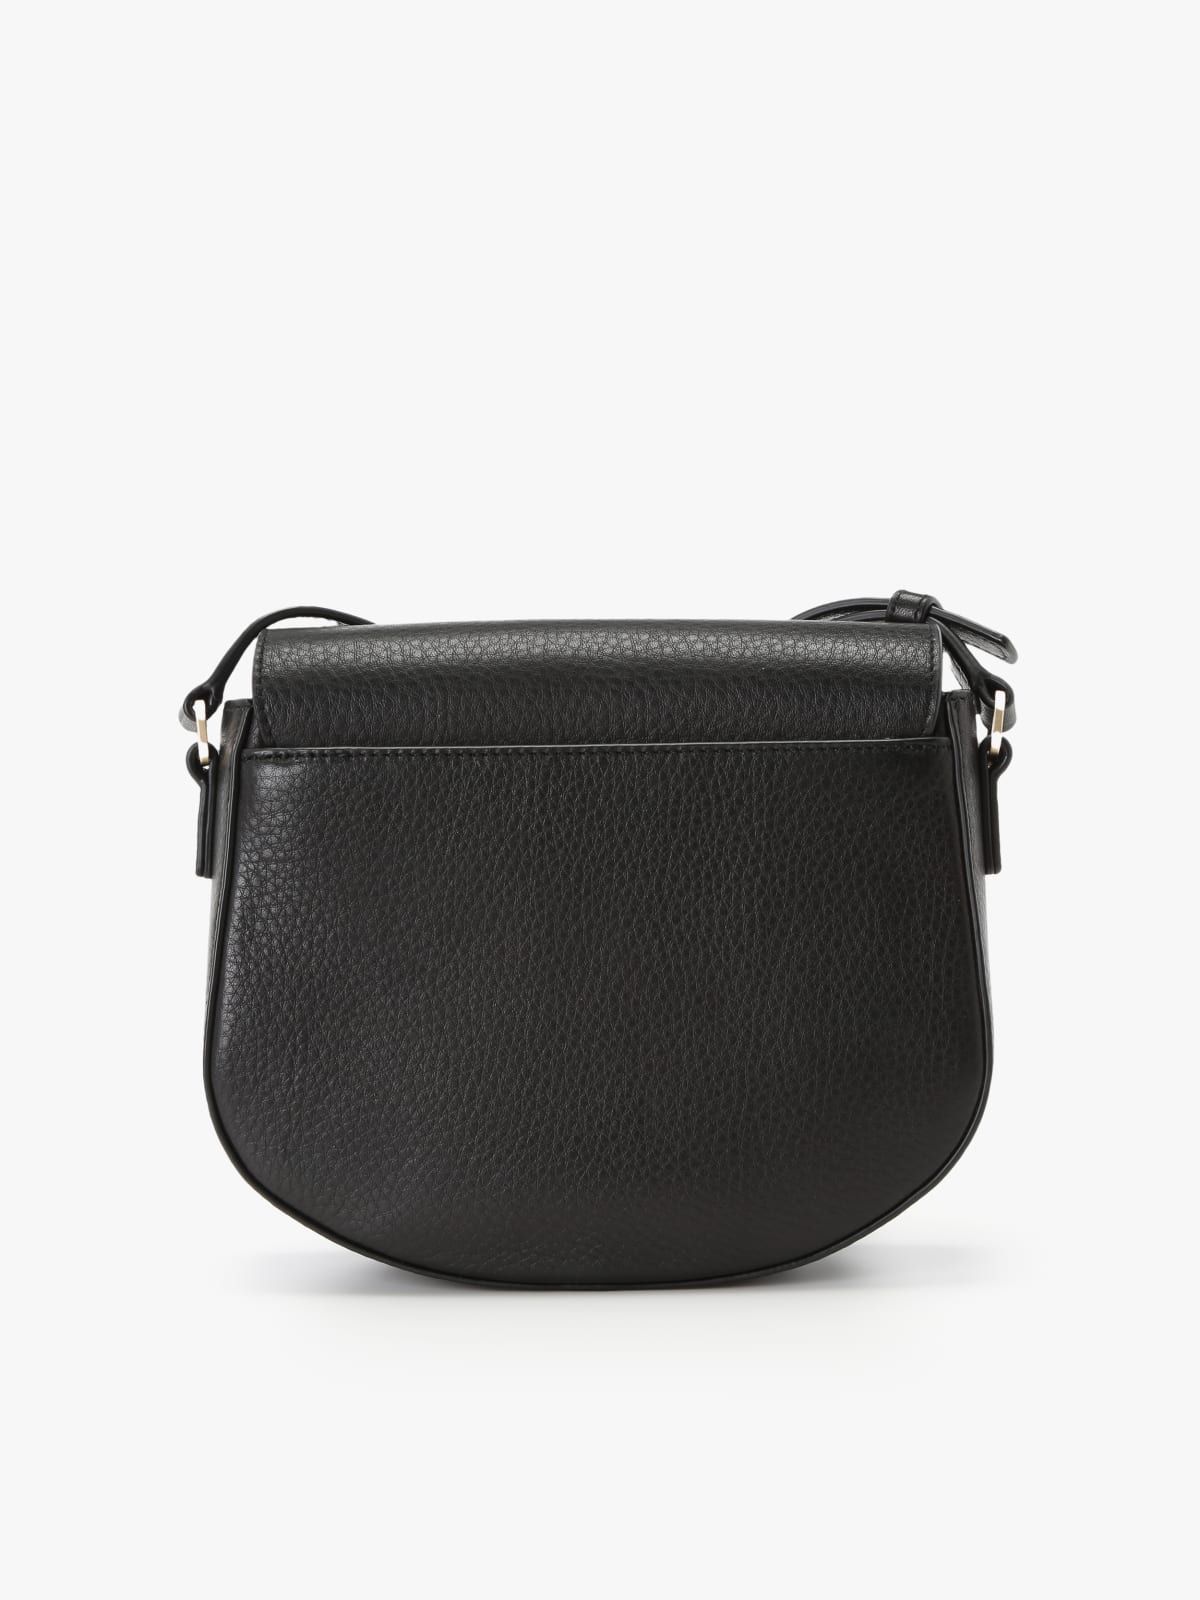 Grained leather horizontal bag